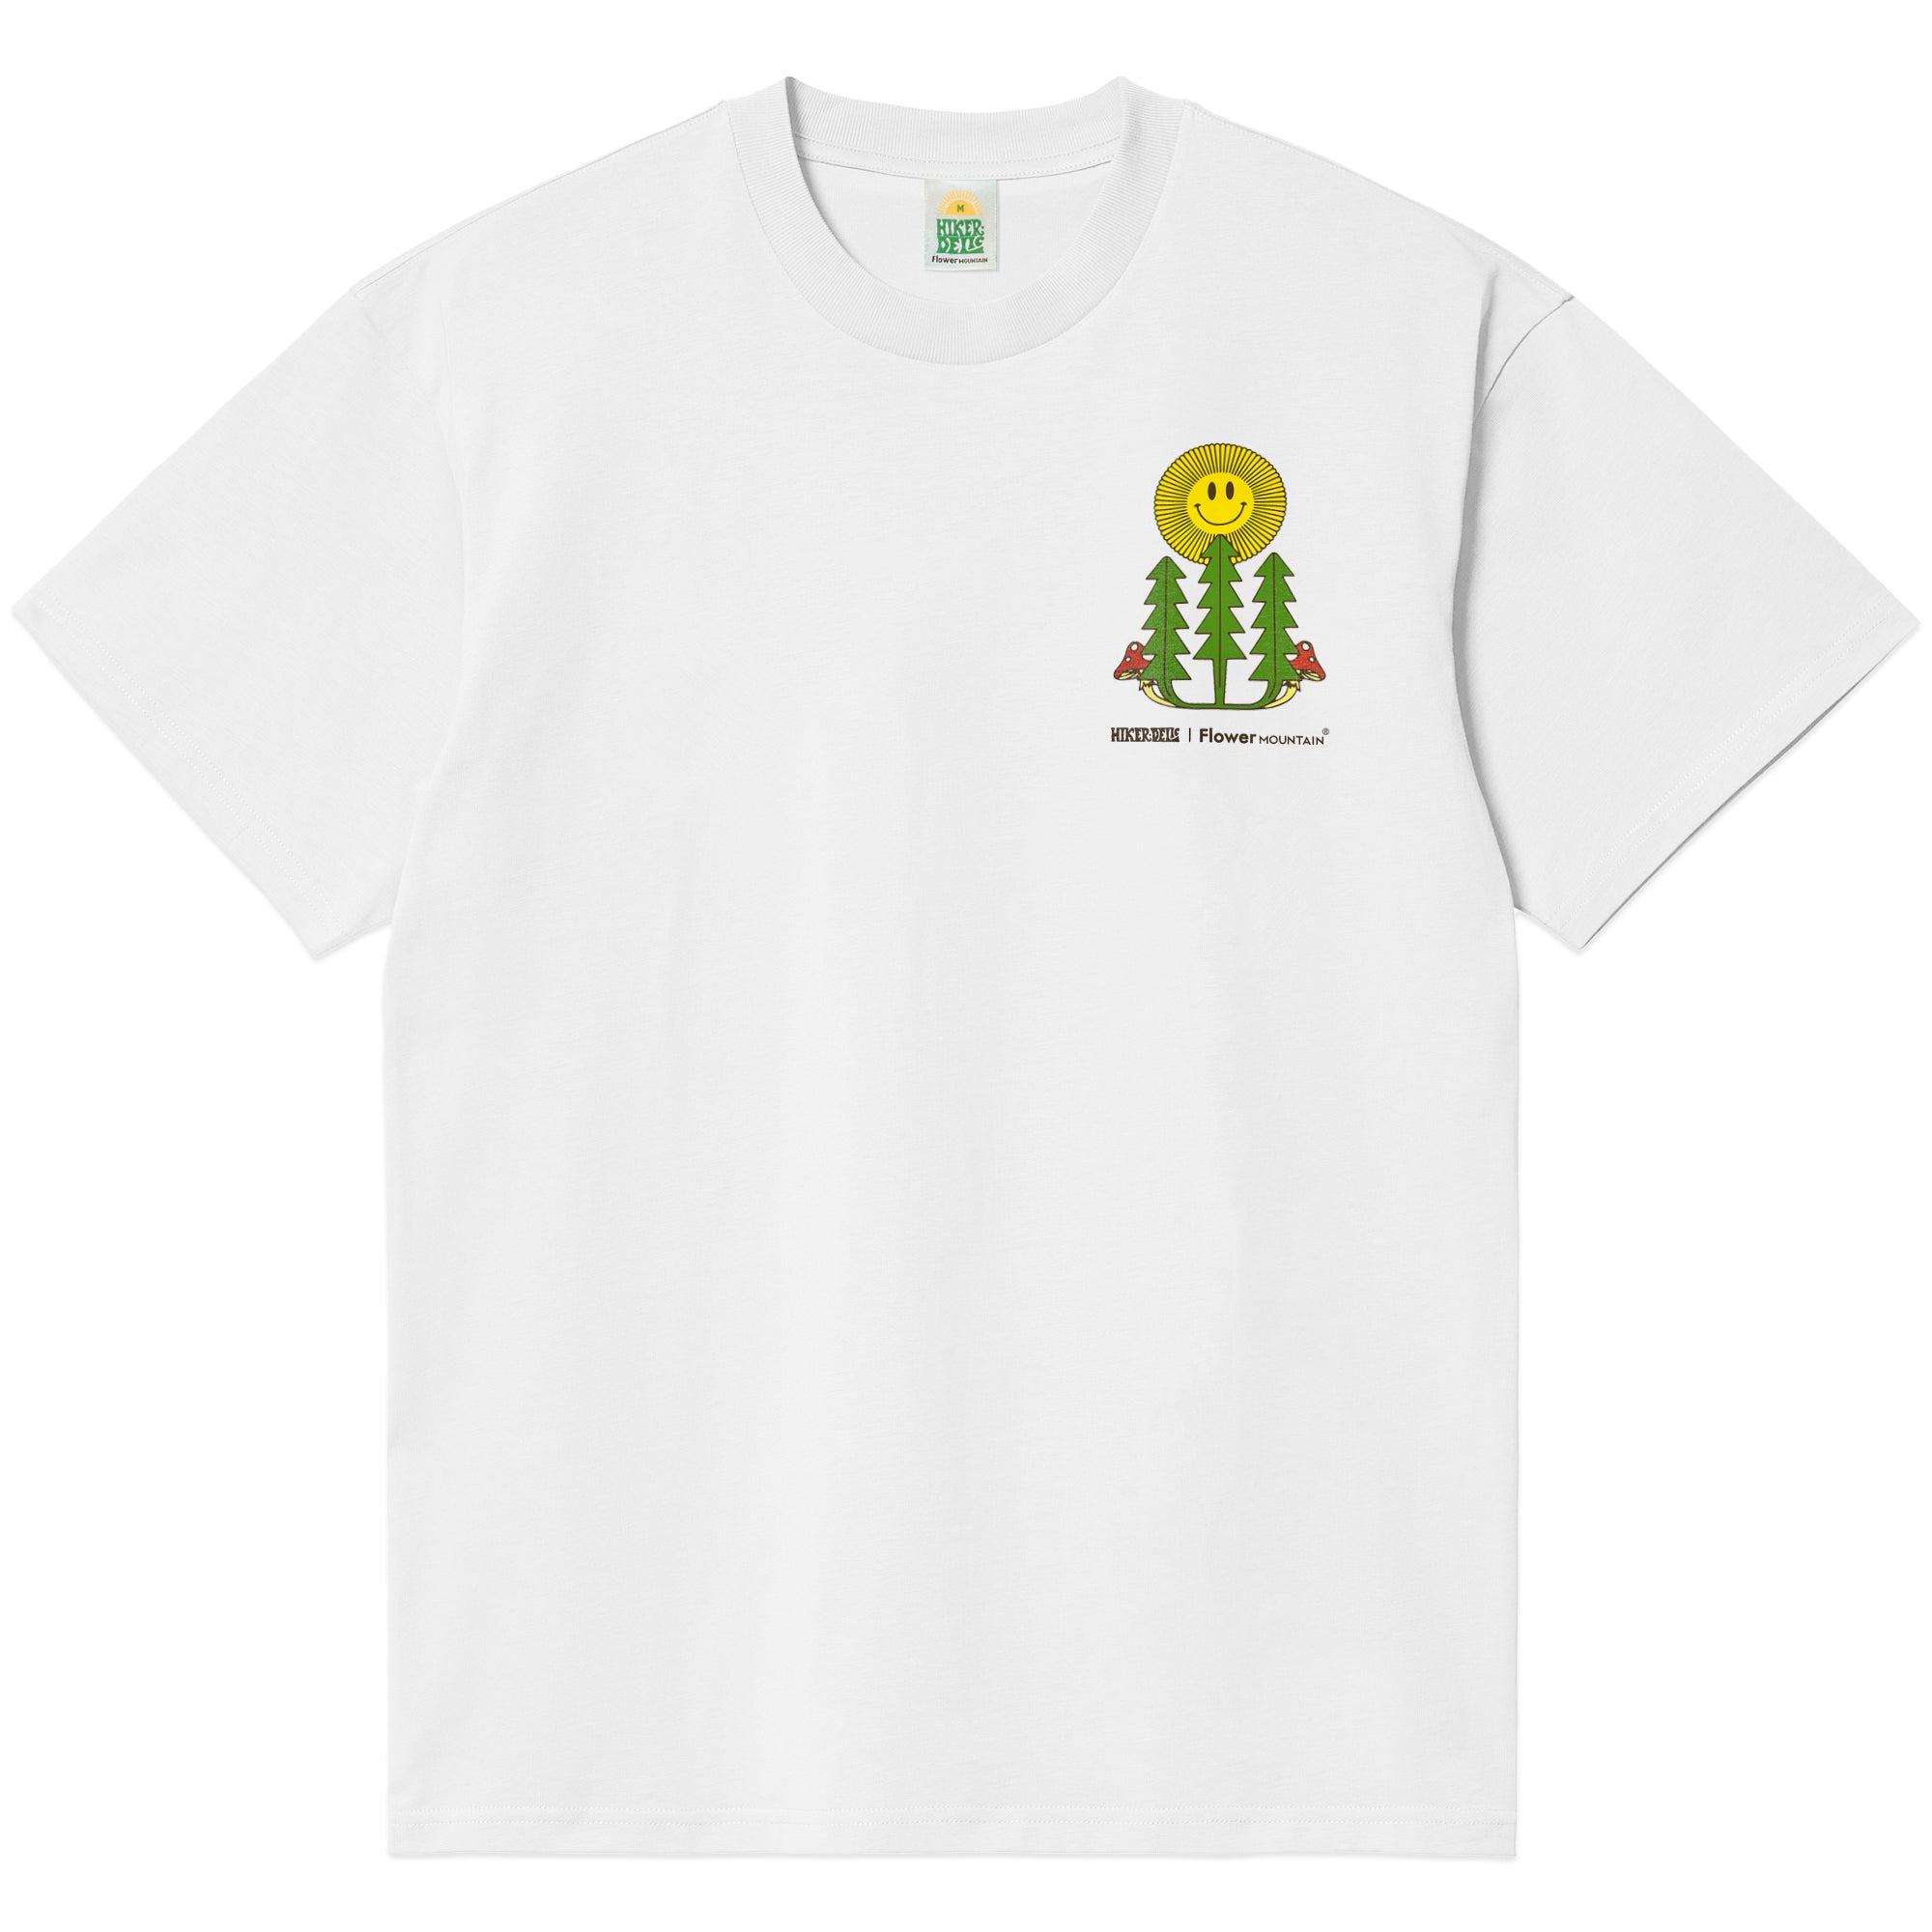 Hikerdelic x Flower Mountain Personal Growth T-Shirt - White